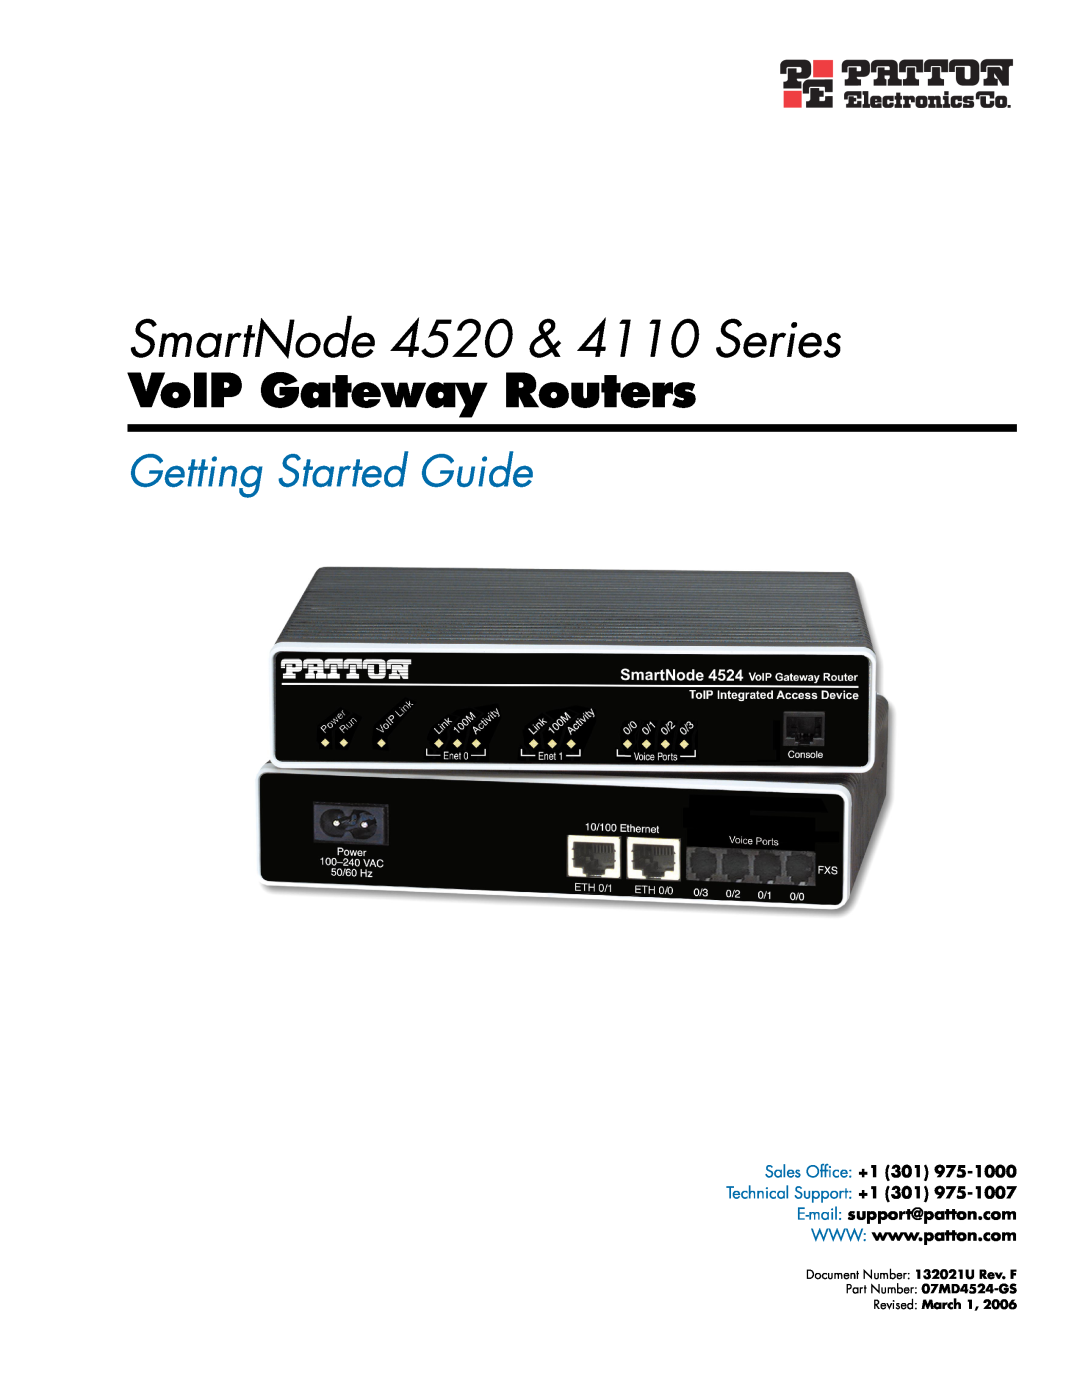 Patton electronic manual SmartNode 4520 & 4110 Series, VoIP Gateway Routers, Getting Started Guide, Revised March 1 